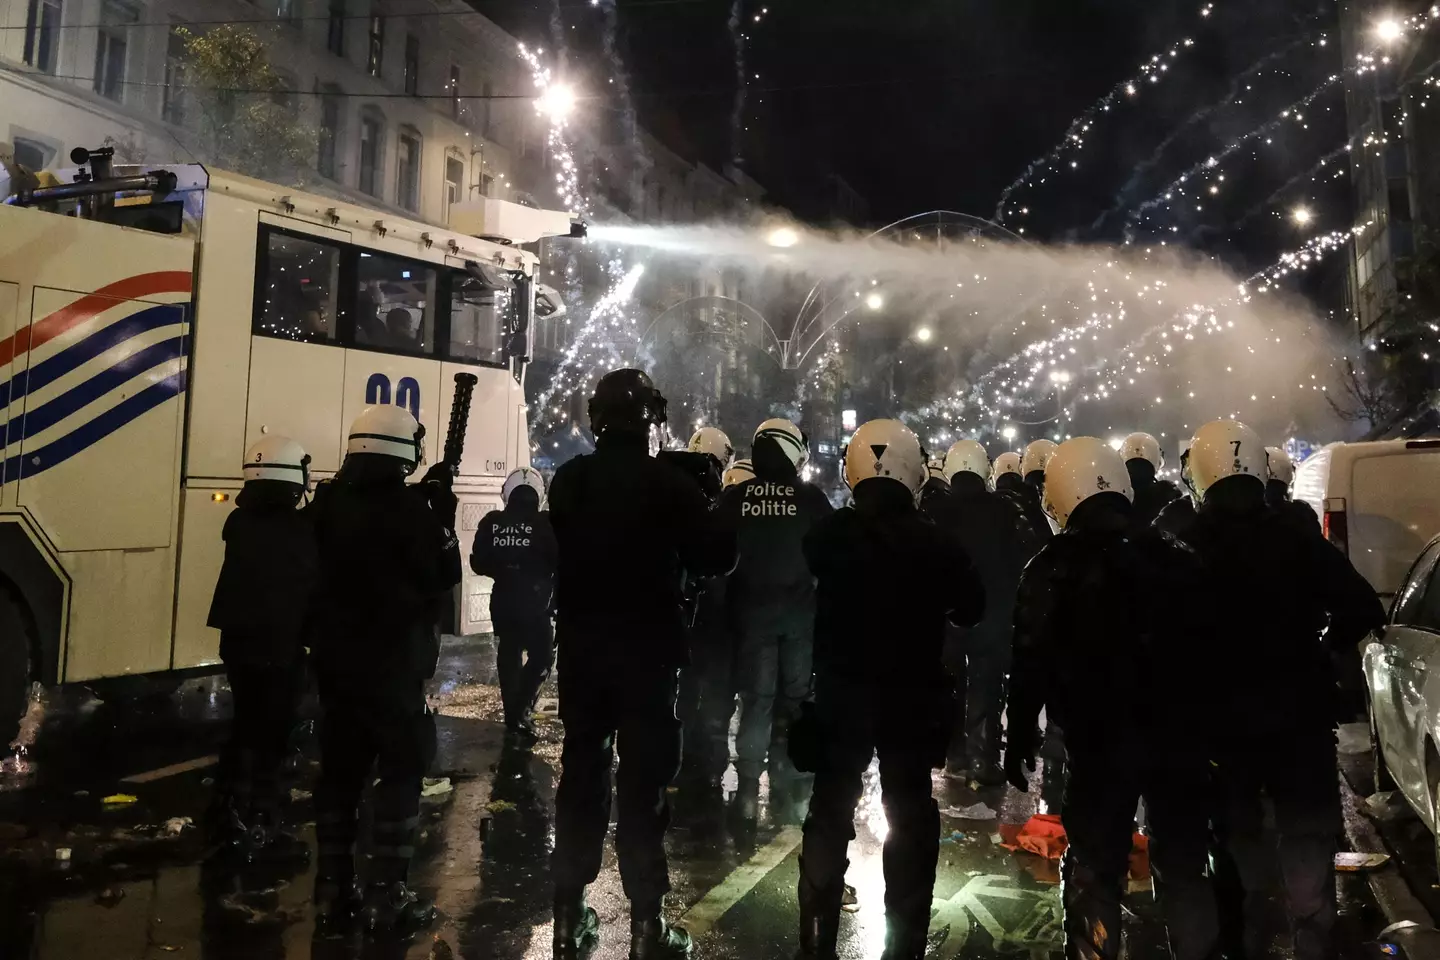 Protestors clashed with riot police after the Qatar 2022 World Cup football match between Belgium and Morocco.